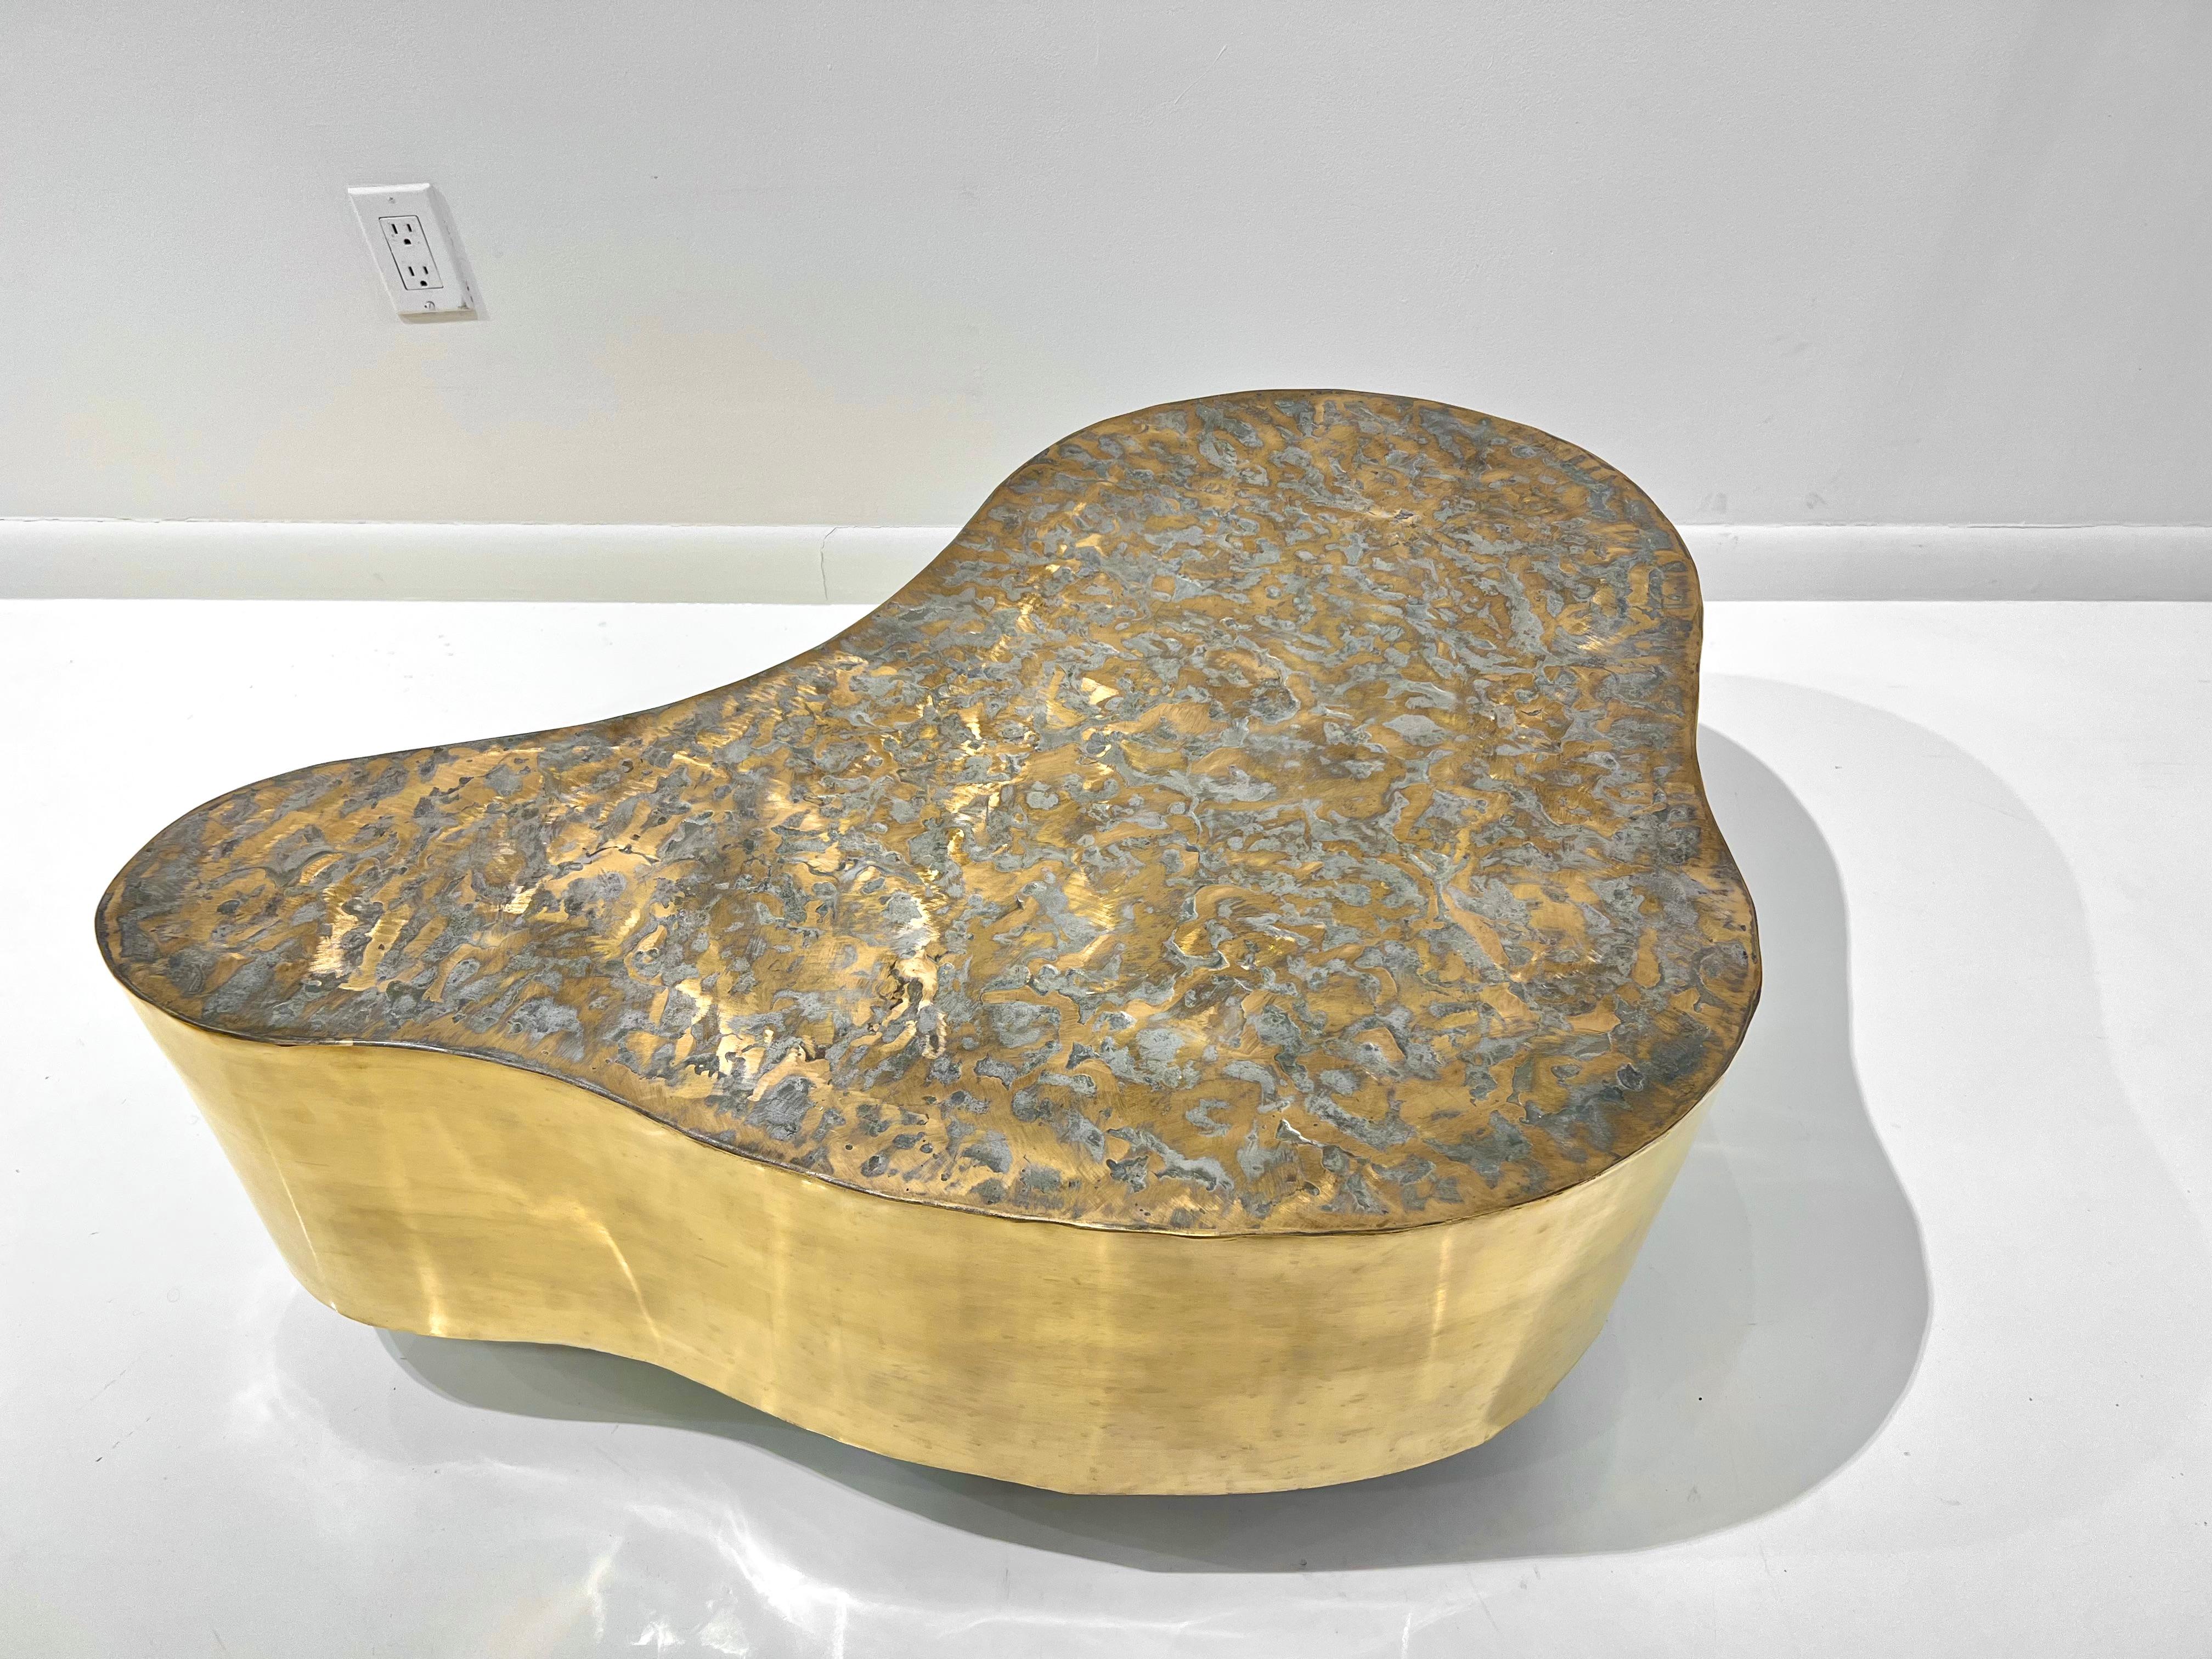 Rare 1960's Bronze Biomorphic Coffee Table by Silas Seandel, patinated with brushed textured top.
This is a smaller SINGLE table from a two- part set. The table is on hidden casters and can be moved with ease.

Approx Dimensions: 35